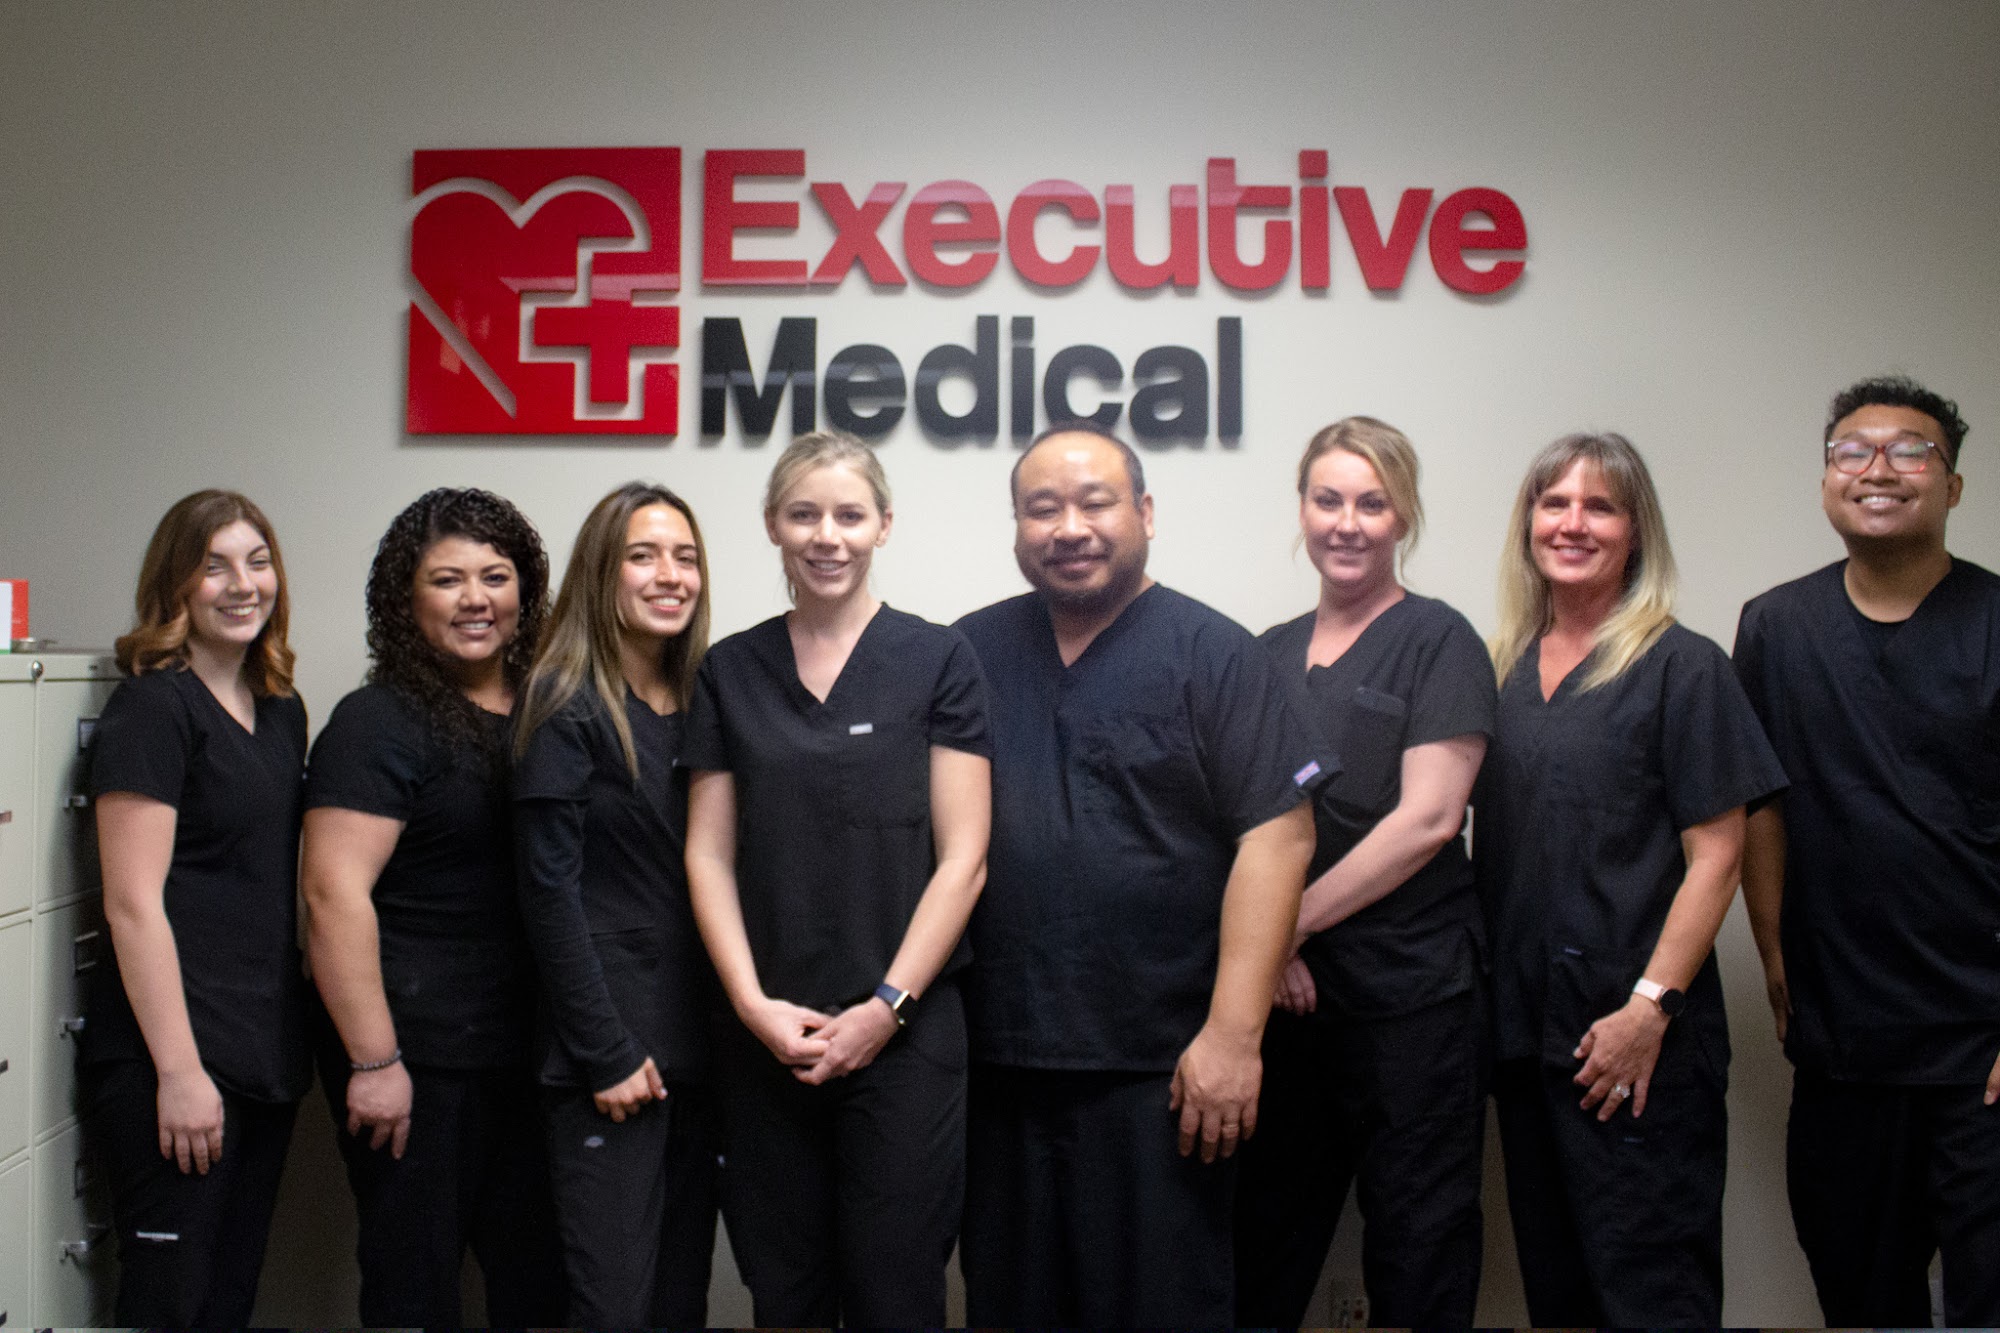 Executive Medical - Physician Wellness Clinic and Med Spa